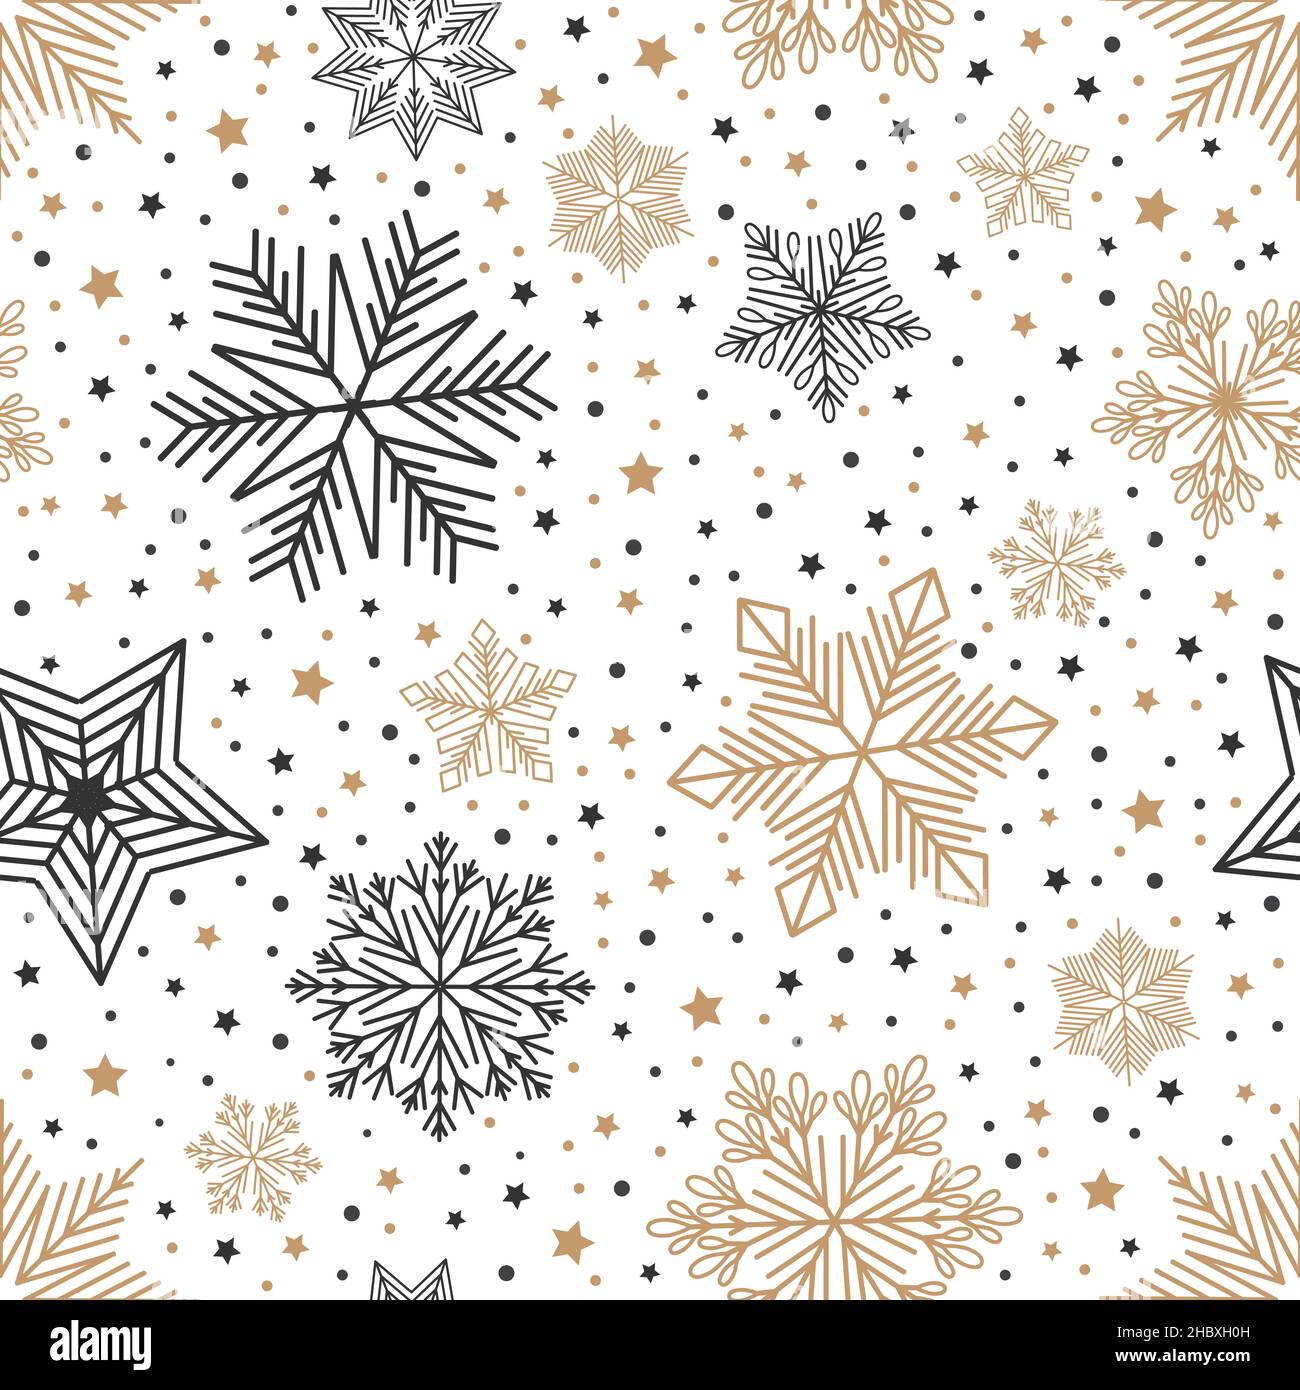 Christmas seamless pattern with geometric motifs. Snowflakes with different ornaments. Stock Vector